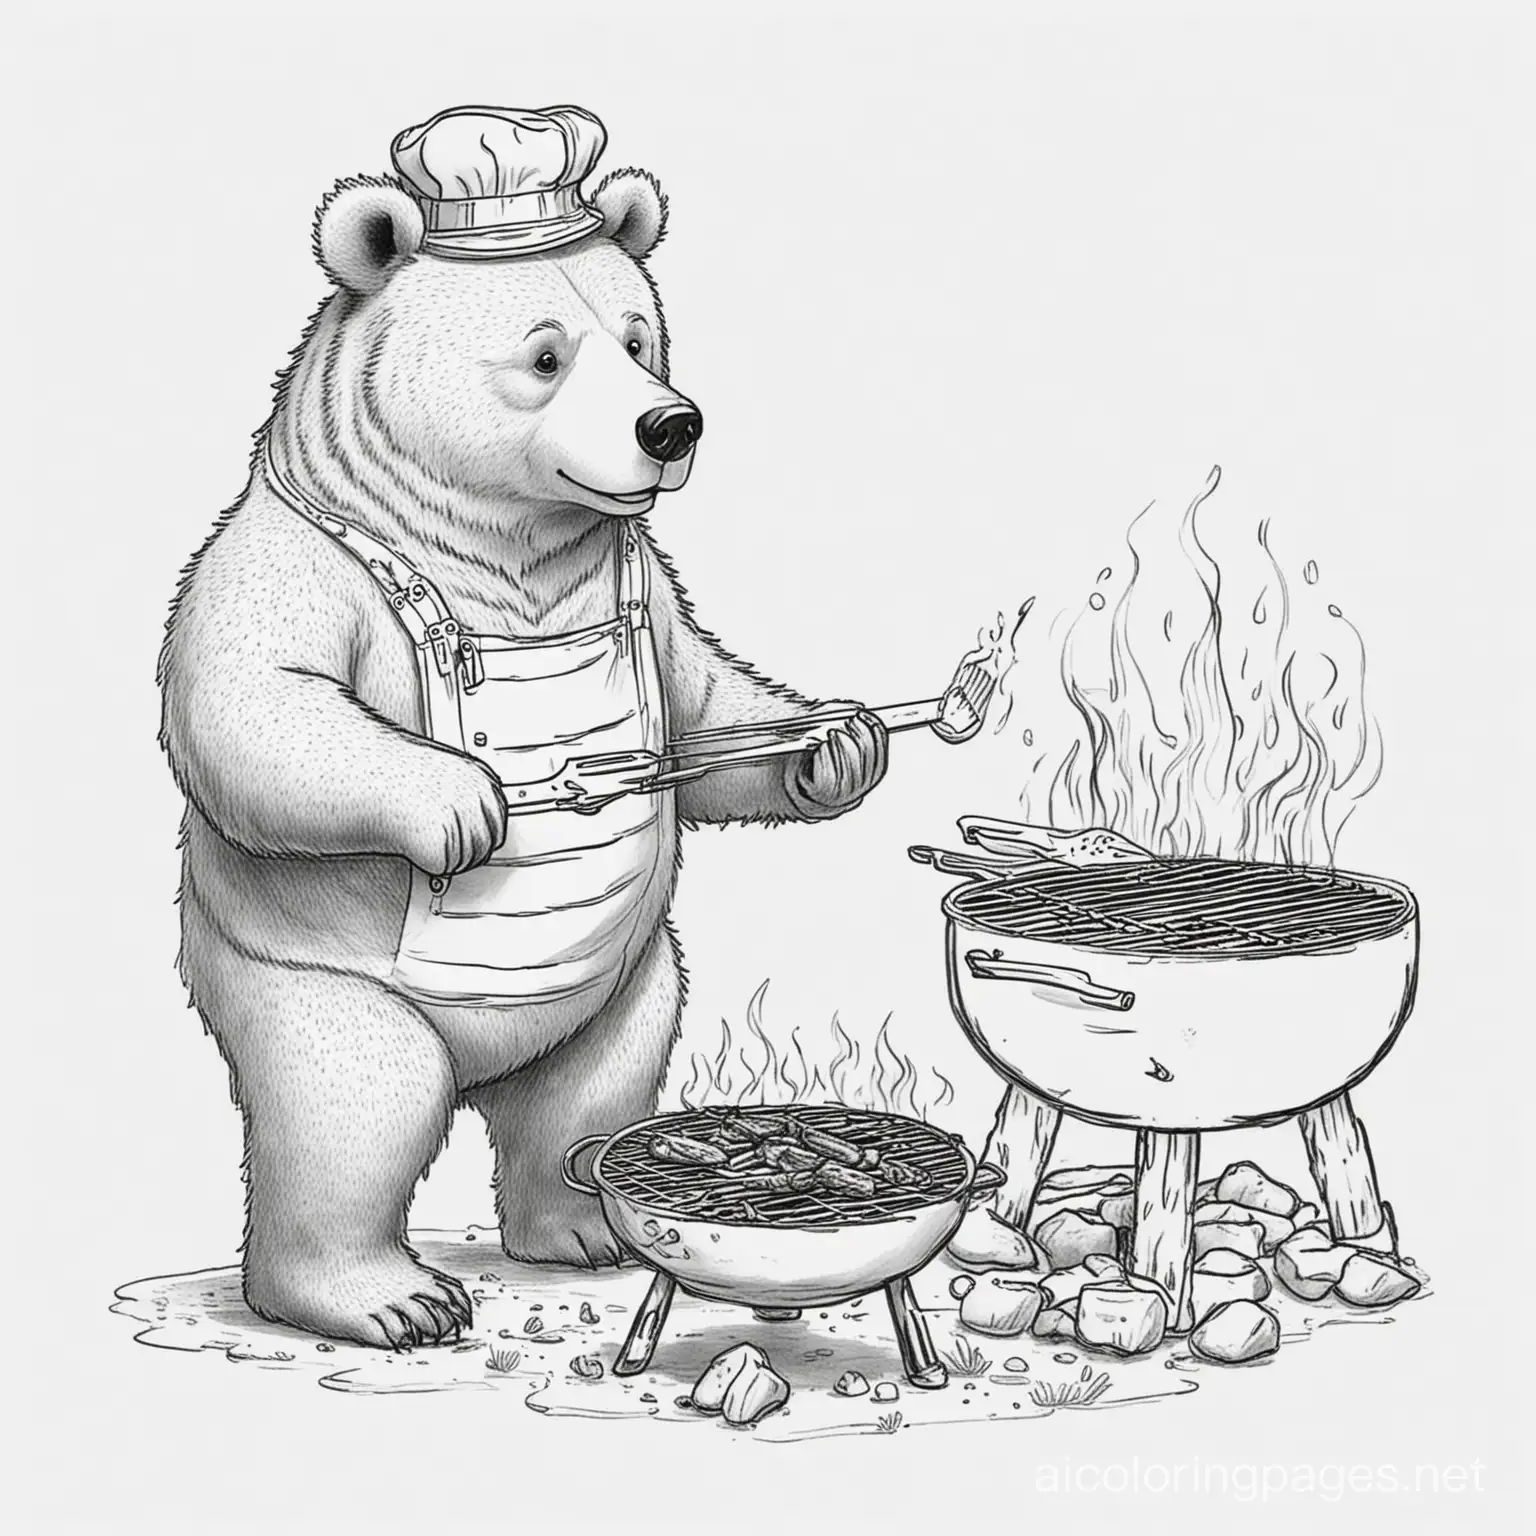 Adult Bear Barbecuing, isolated in white background, Coloring Page, black and white, line art, white background, Simplicity, Ample White Space. The background of the coloring page is plain white to make it easy for young children to color within the lines. The outlines of all the subjects are easy to distinguish, making it simple for kids to color without too much difficulty